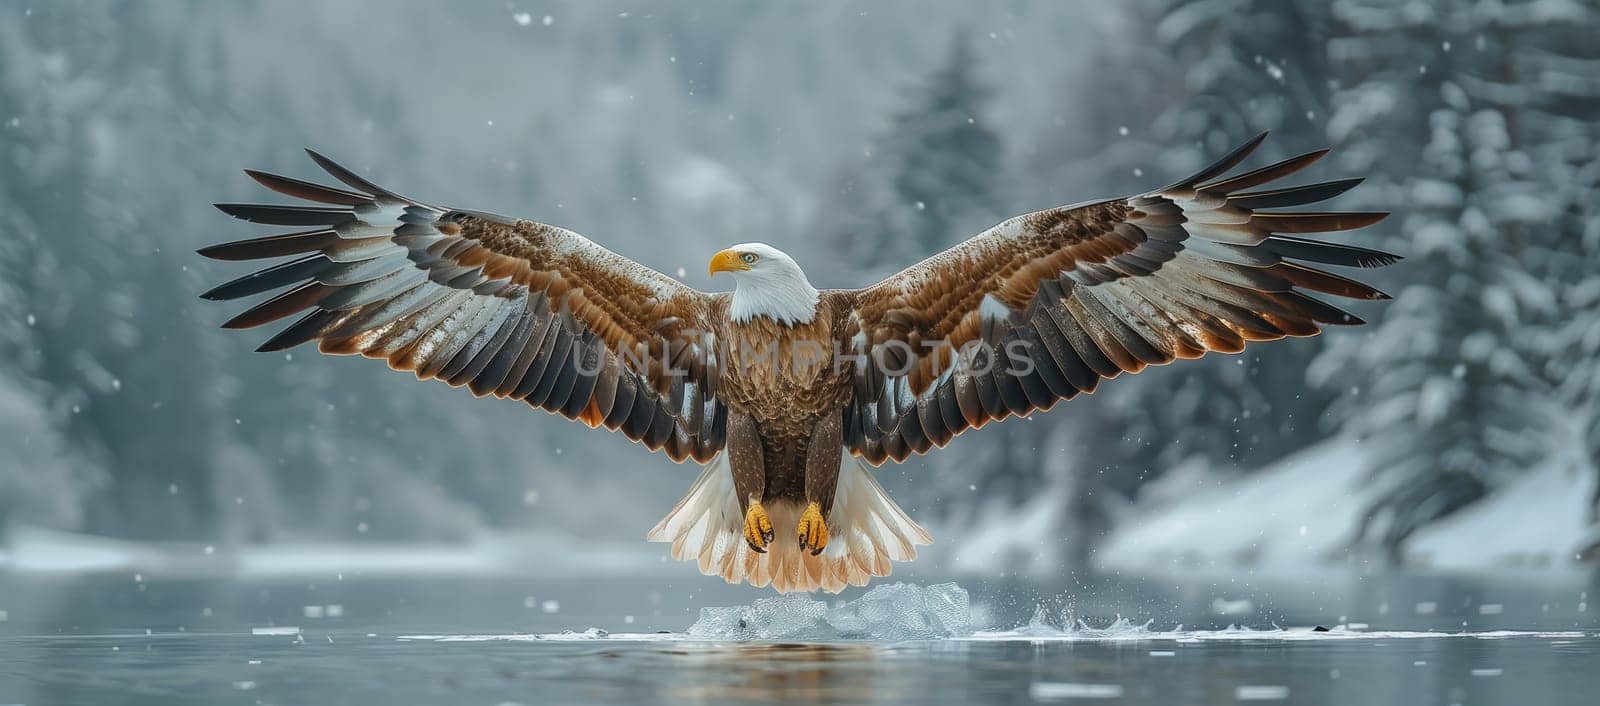 Accipitridae bird of prey, an eagle with a powerful beak soaring over water by richwolf